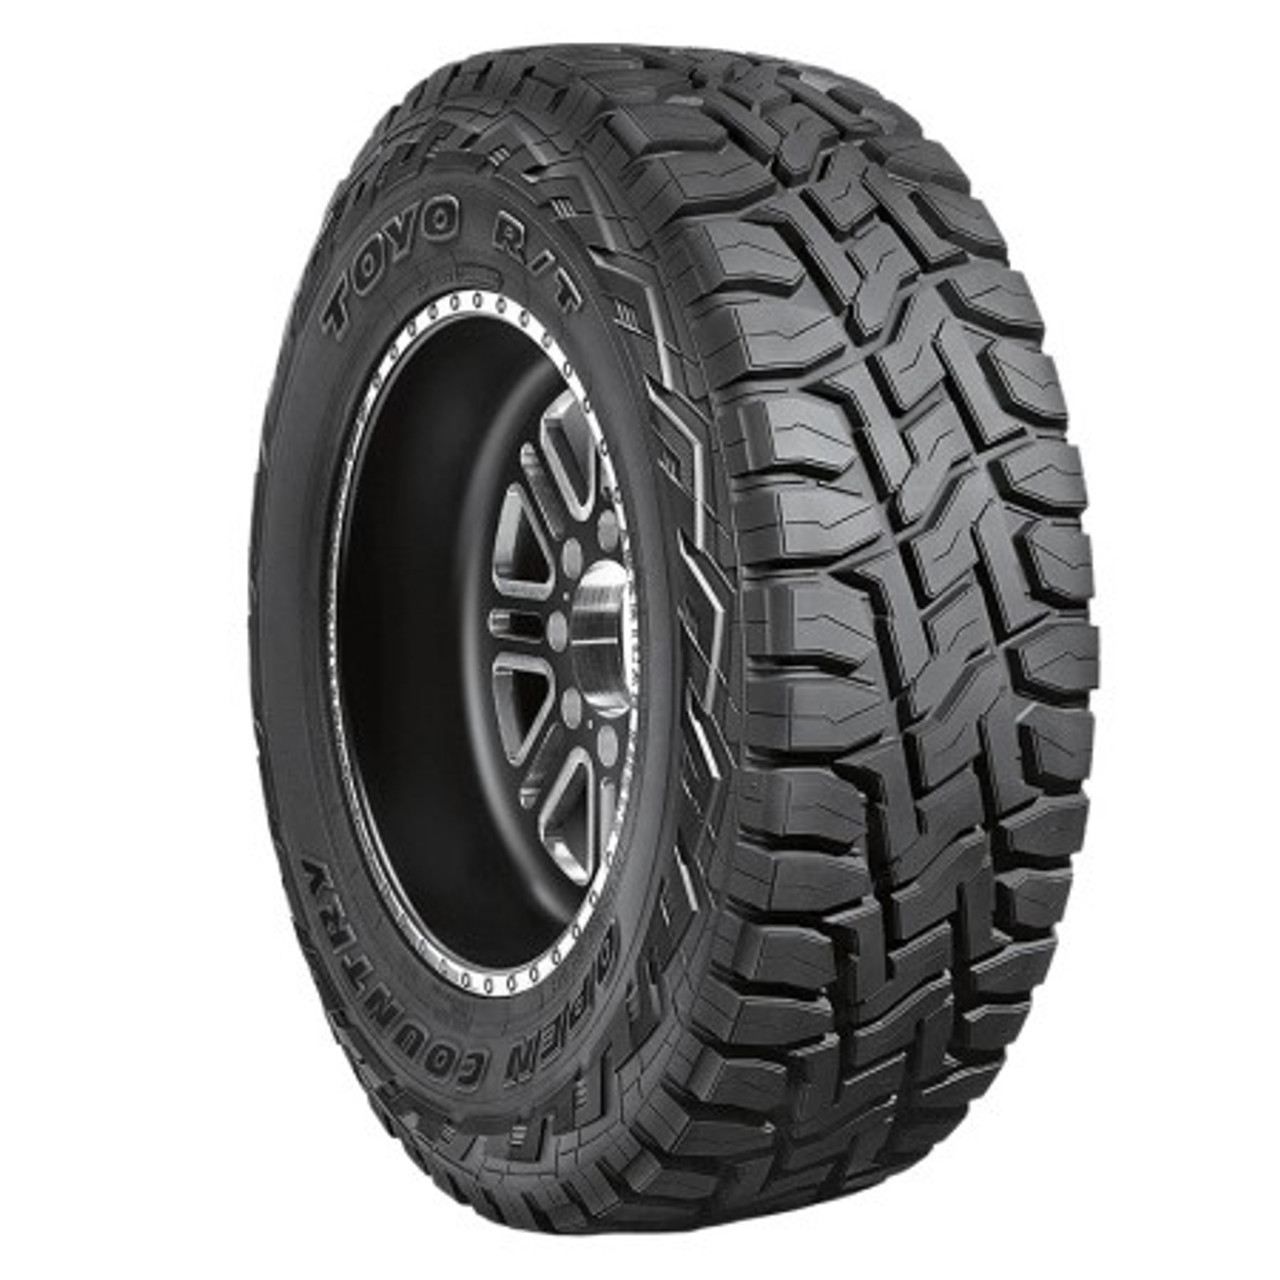 Toyo Open Country R/T Tire - 35X1250R17